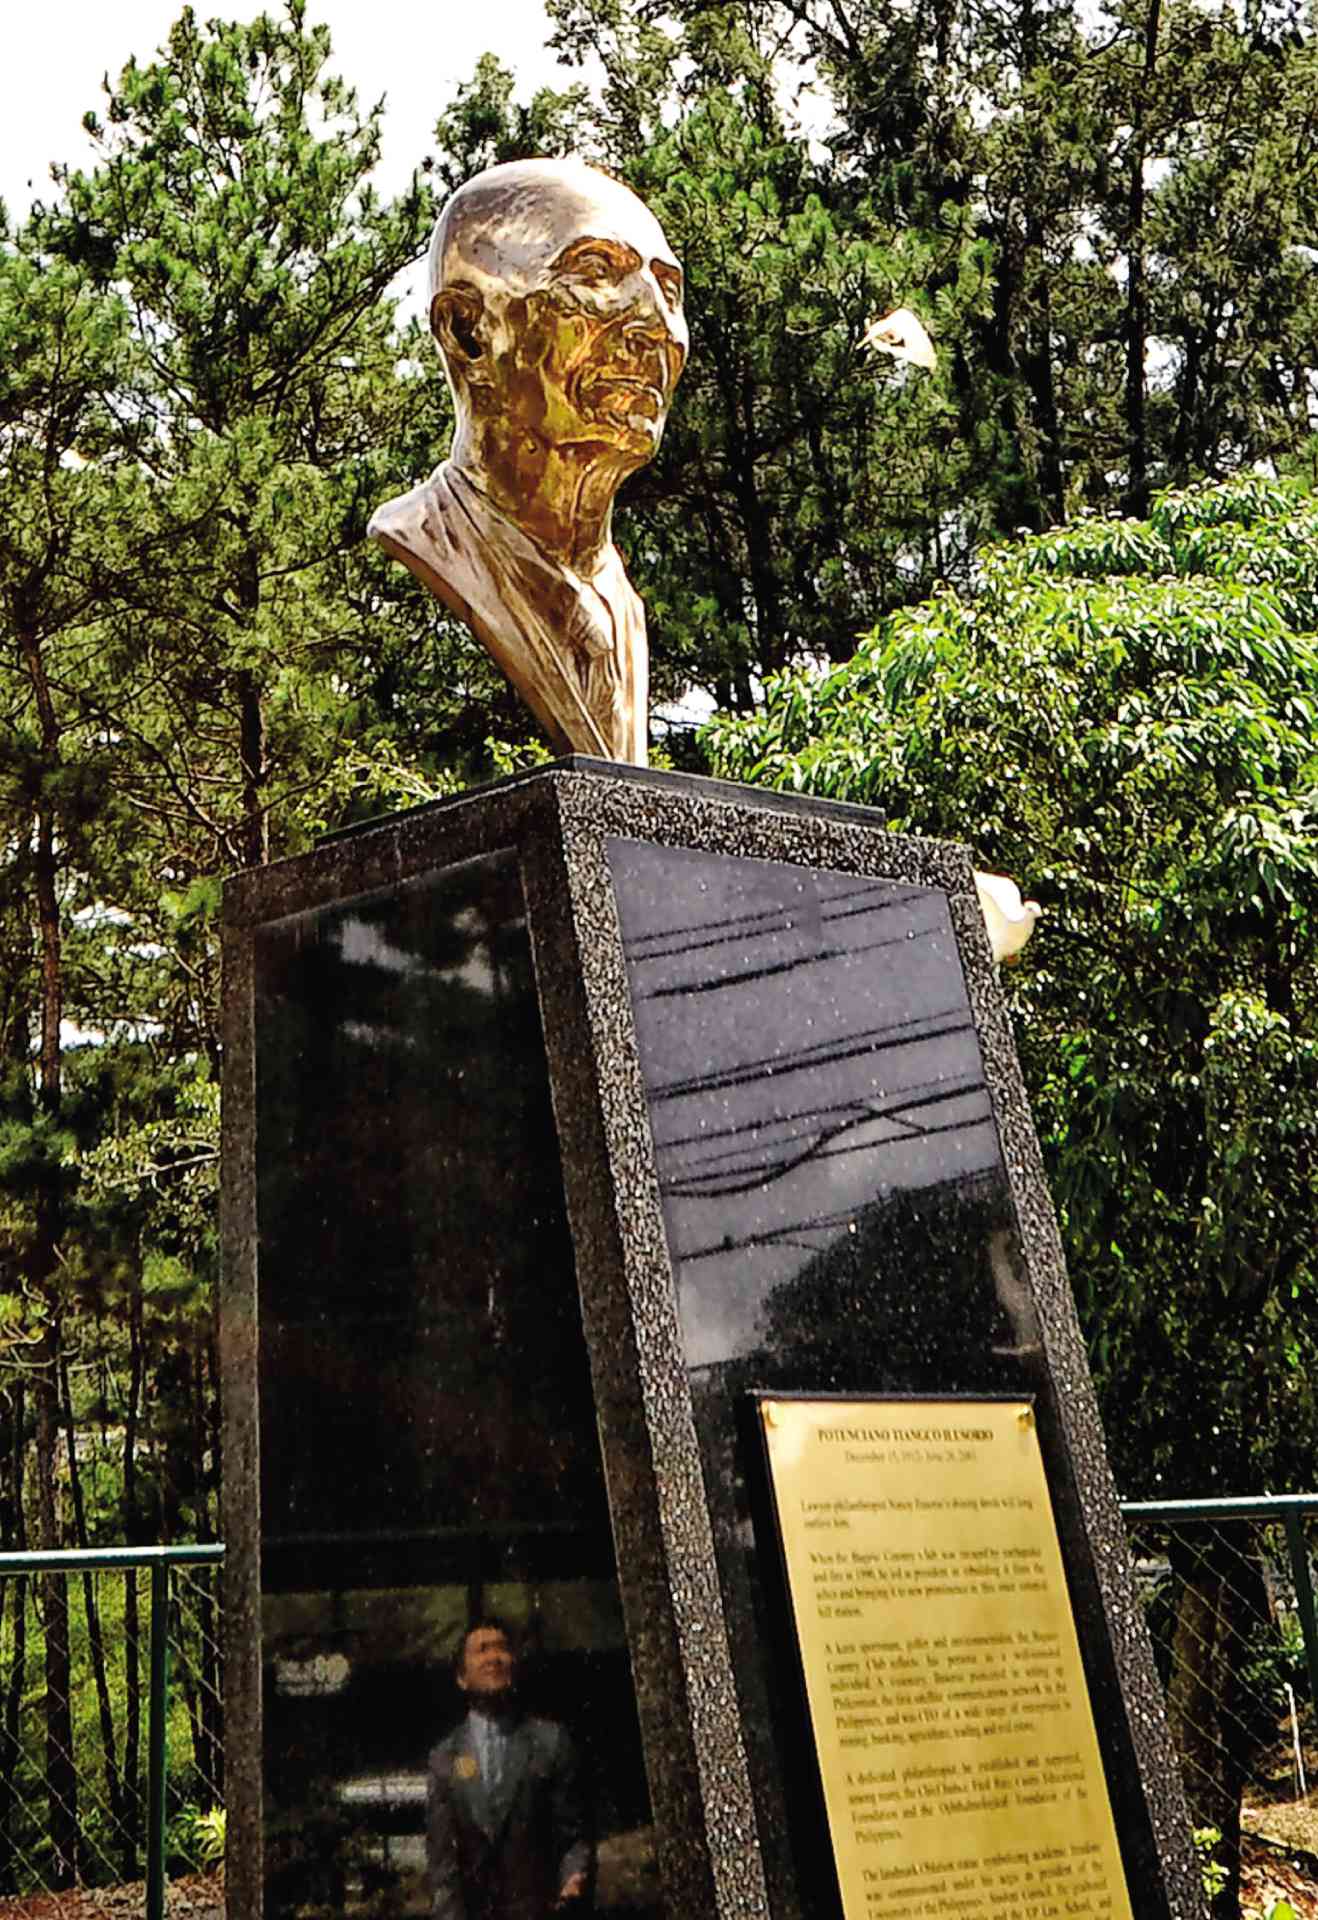 BUST at Baguio Country Club in honor of Potenciano Ilusorio, adopted son of Baguio City. FILE PHOTO